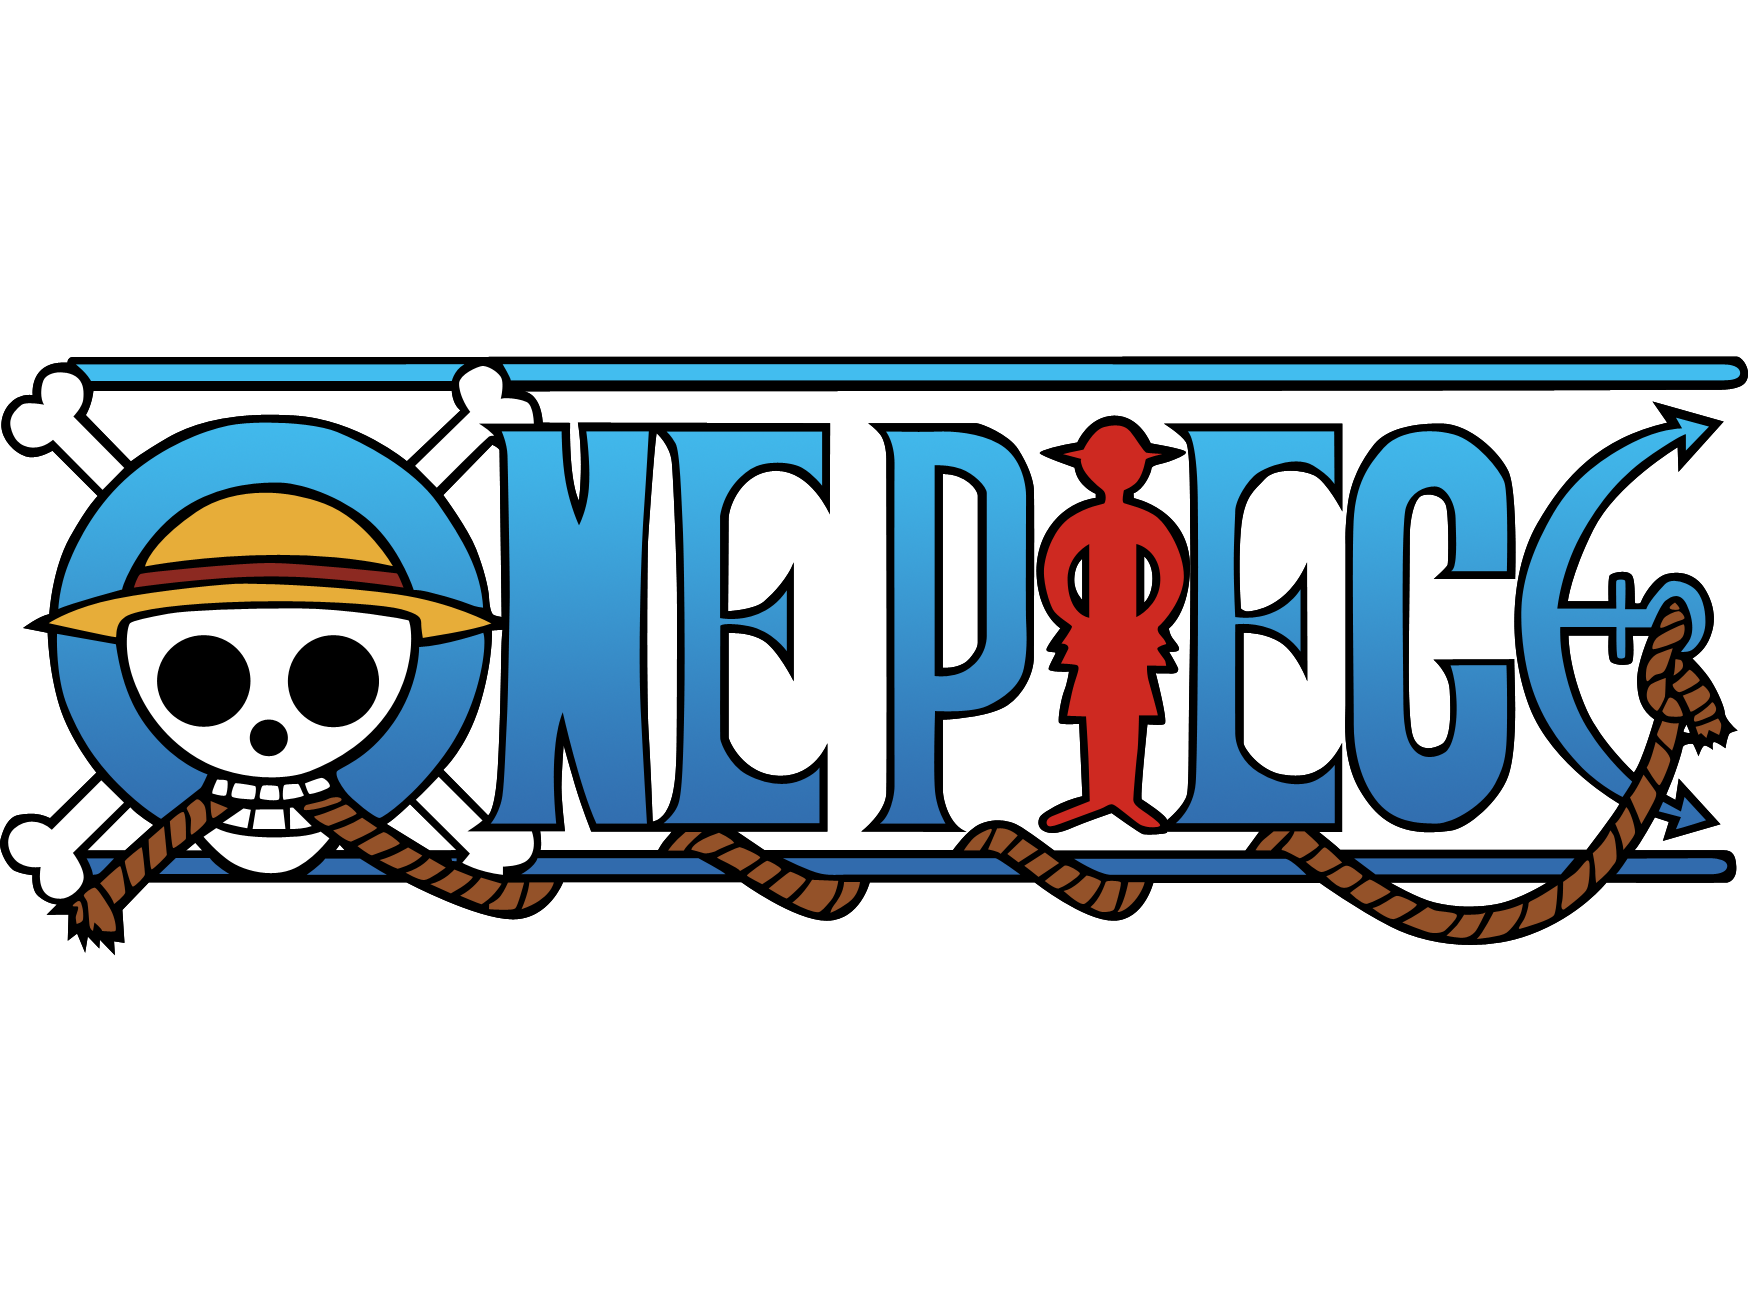 one piece logo | Logospike.com: Famous and Free Vector Logos